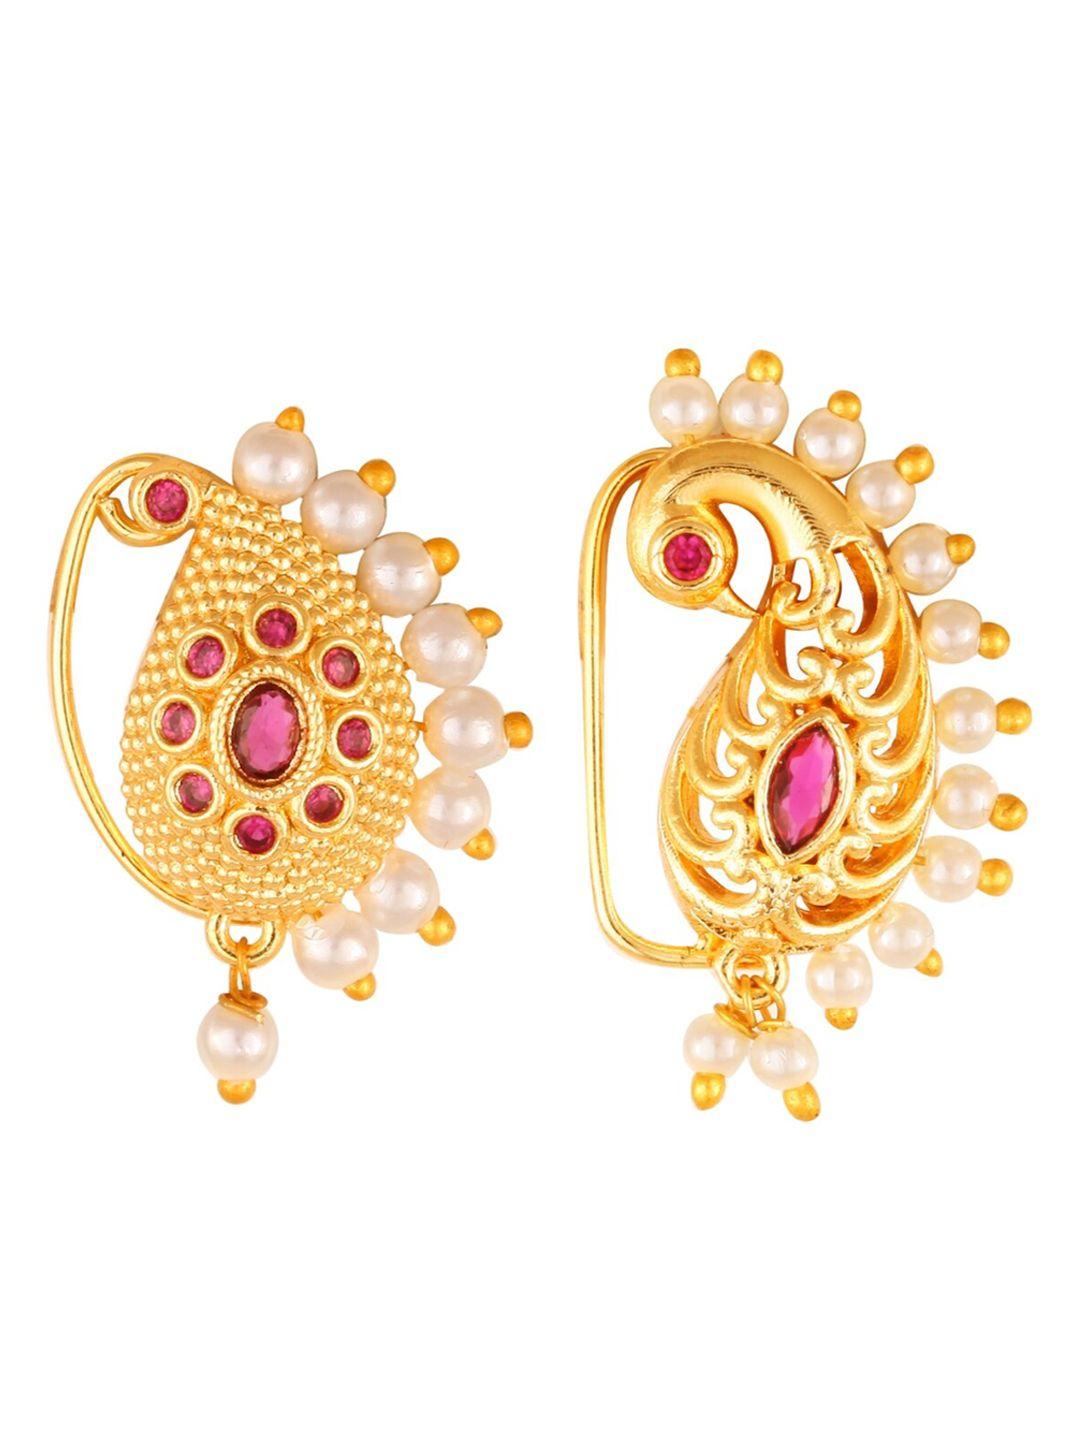 vighnaharta set of 2 gold-plated stone studded & pearl beaded nosepins